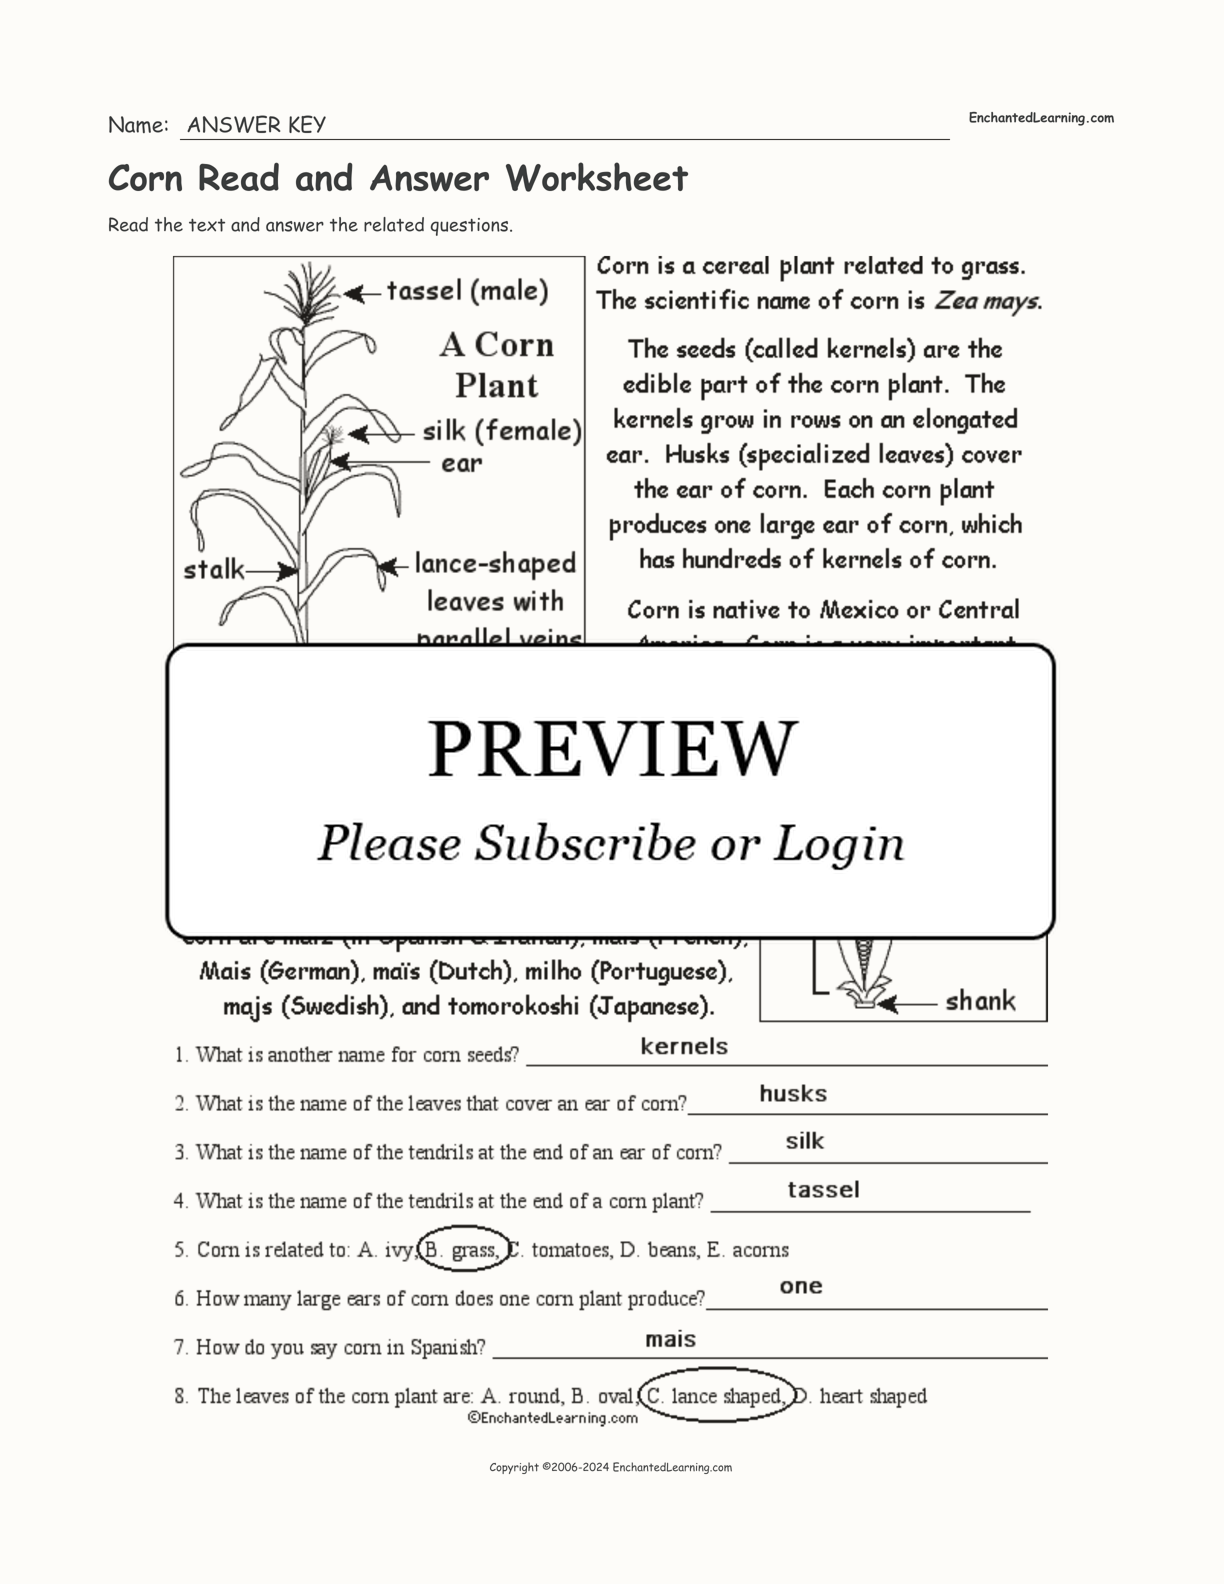 Corn Read and Answer Worksheet interactive worksheet page 2